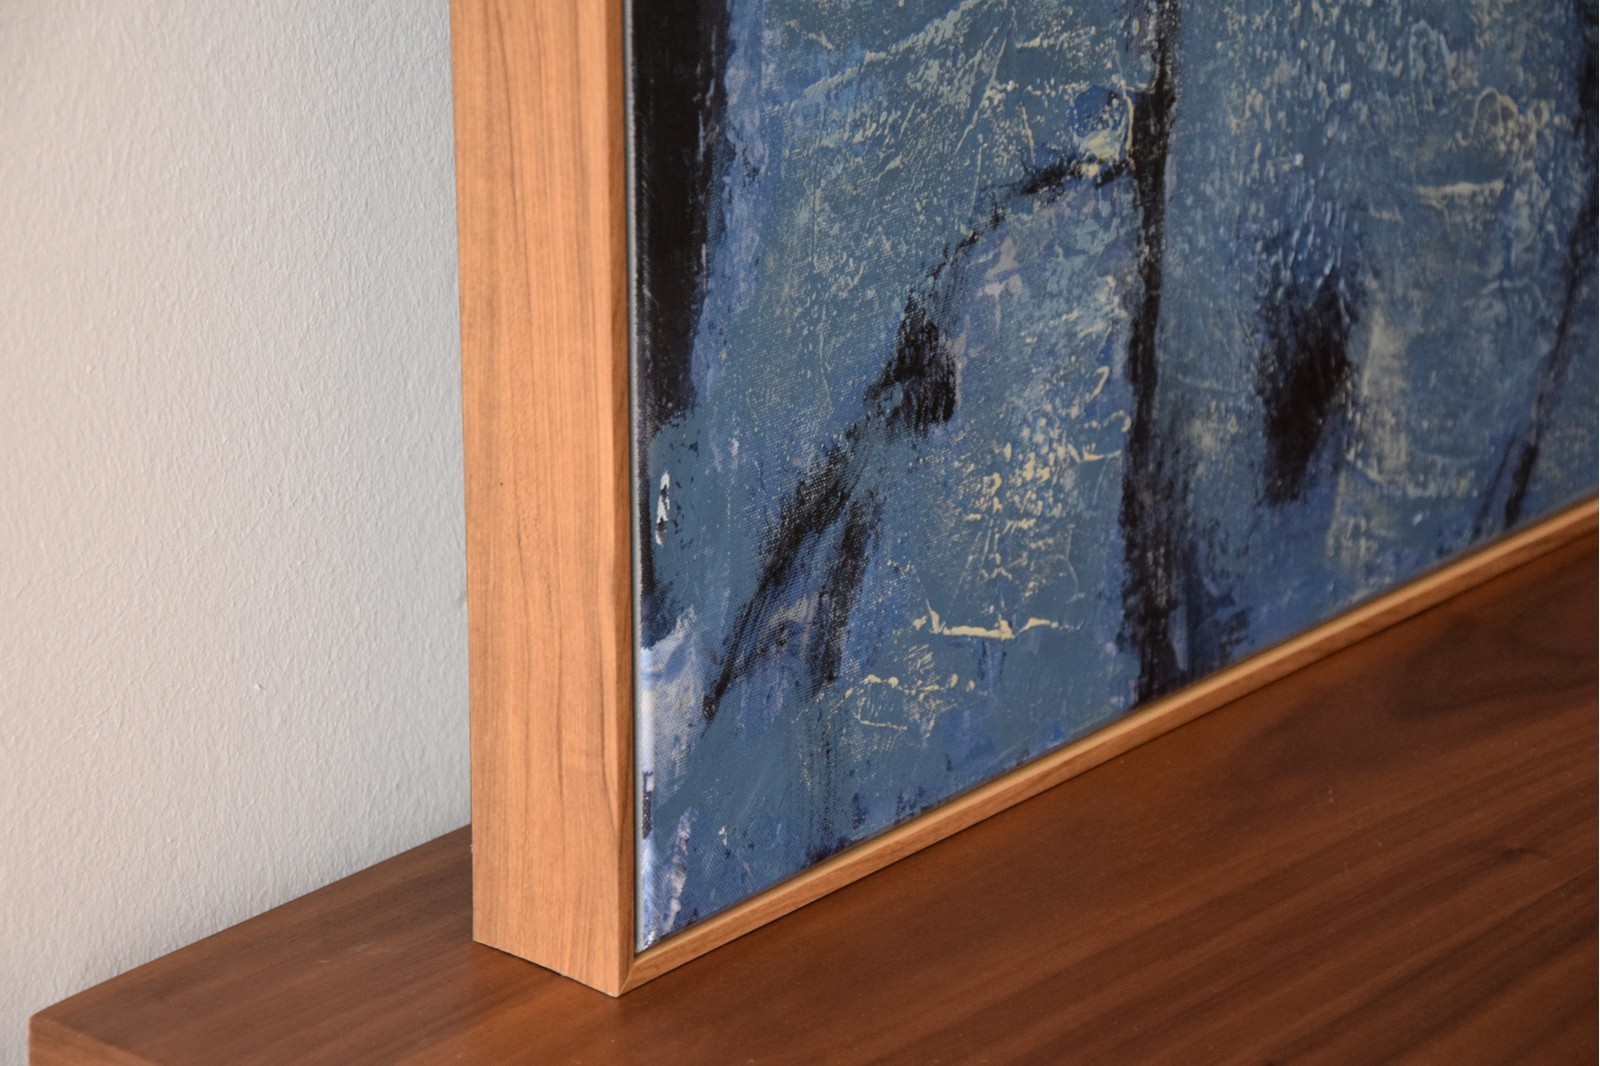 ABSTRACT PAINTING CLIFF WITH FRAME